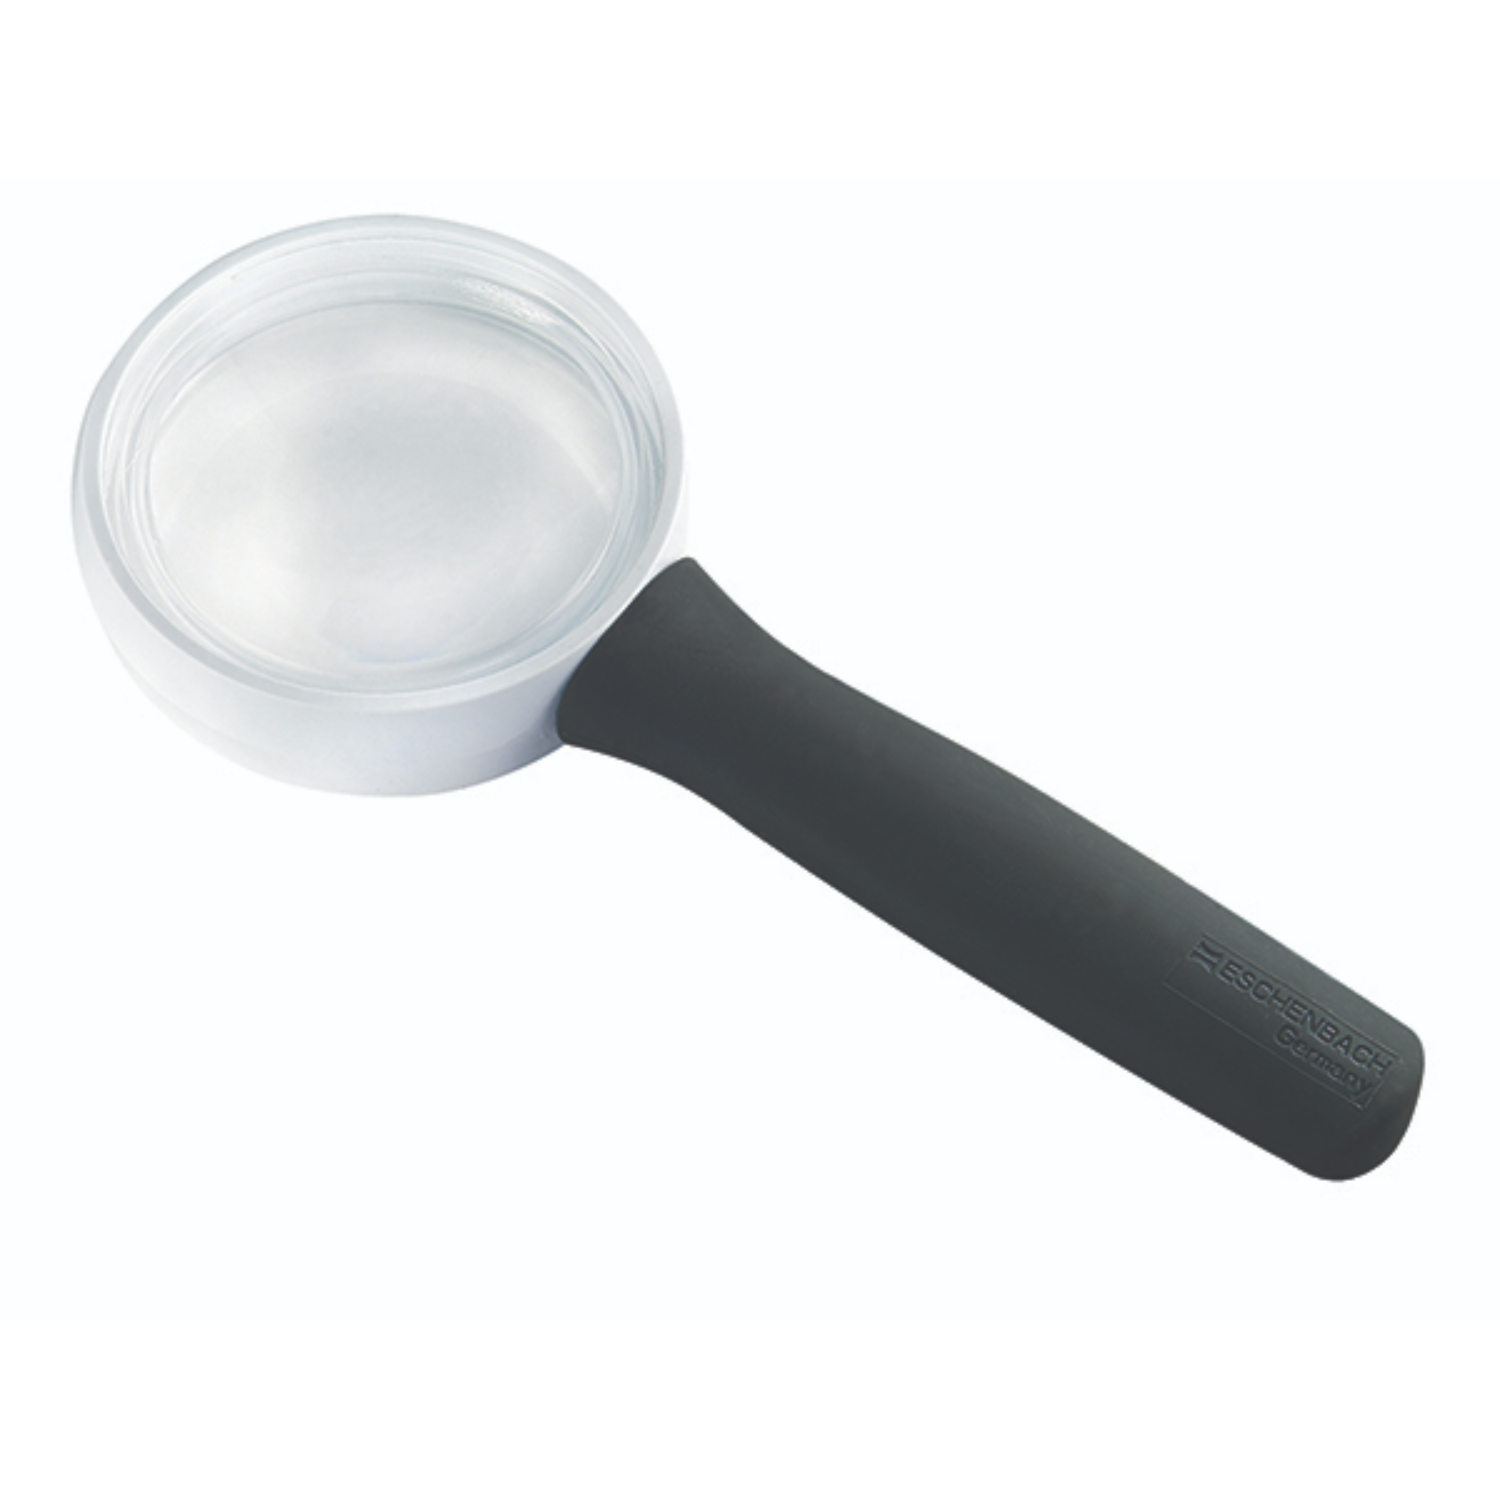 Image of the 4.5x ERGO handheld magnifying glass from Eschenbach.